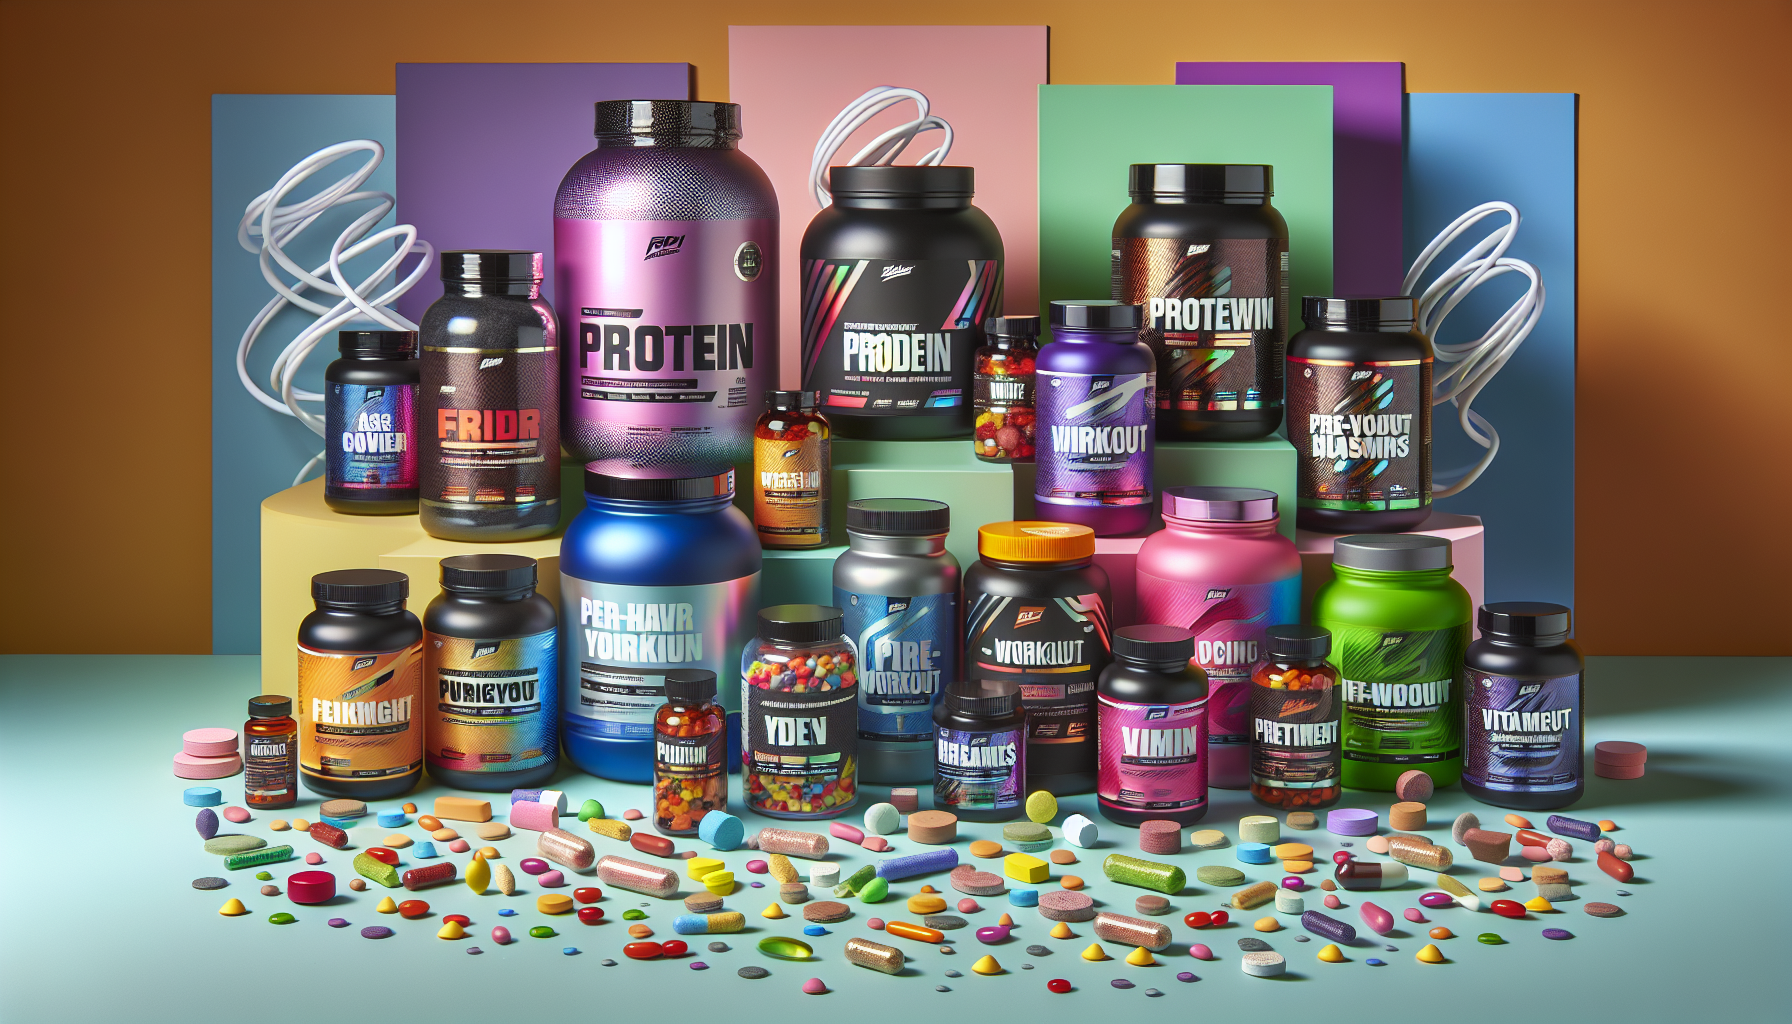 Various fitness supplements displayed with nutritional labels